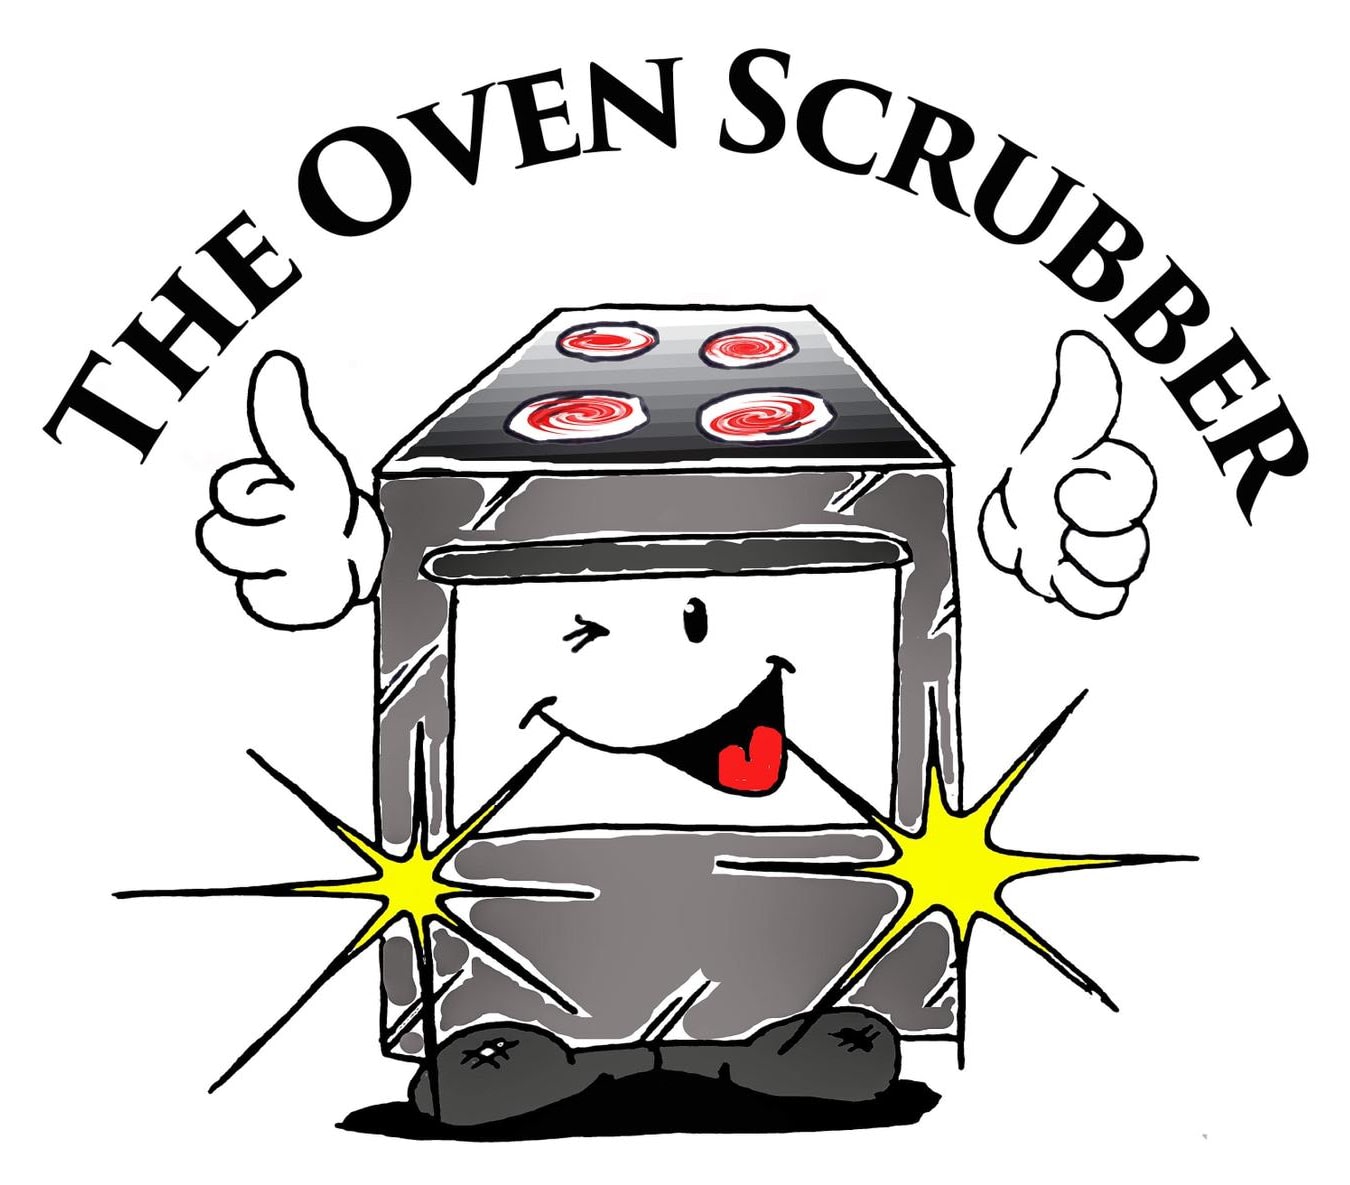 The Oven Scrubber